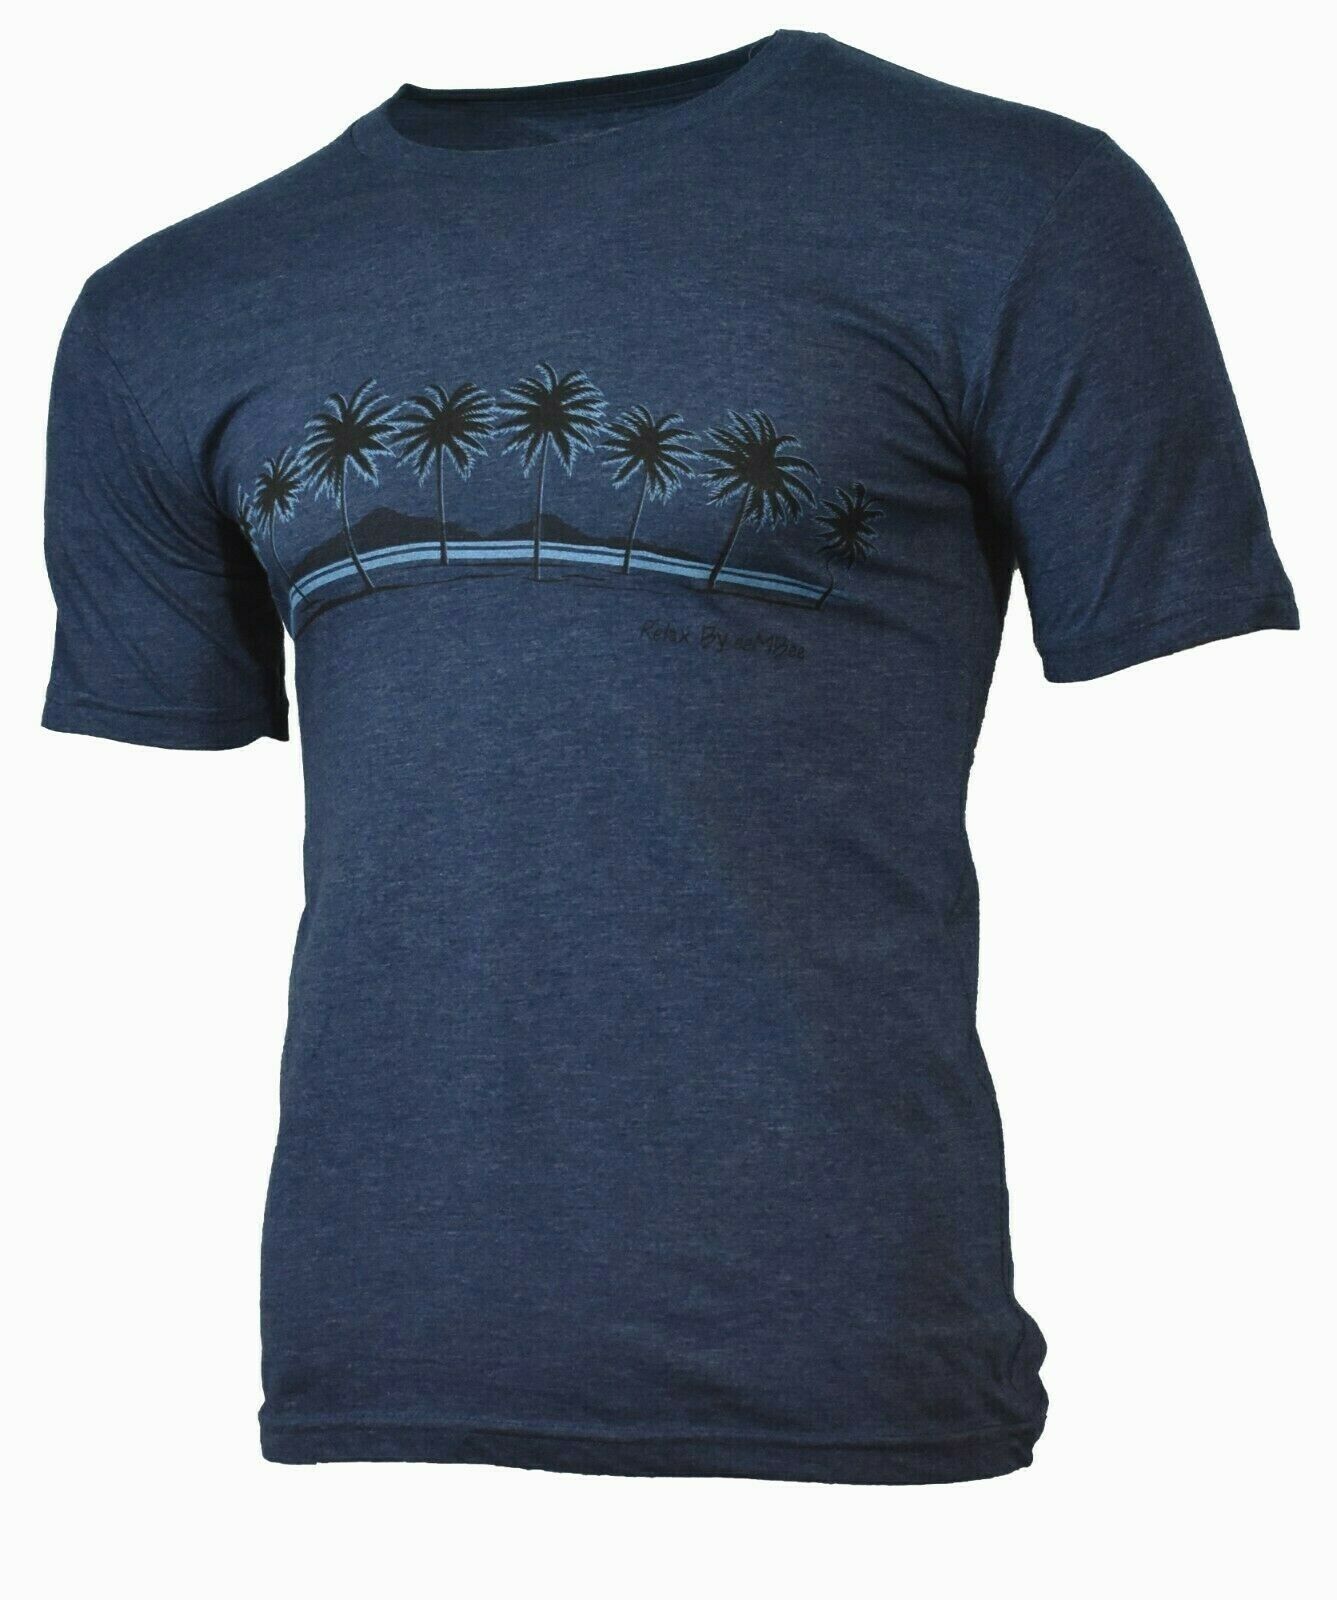 Men's T-Shirt Sunset Beach Palm Trees No worries Here By eeMBee